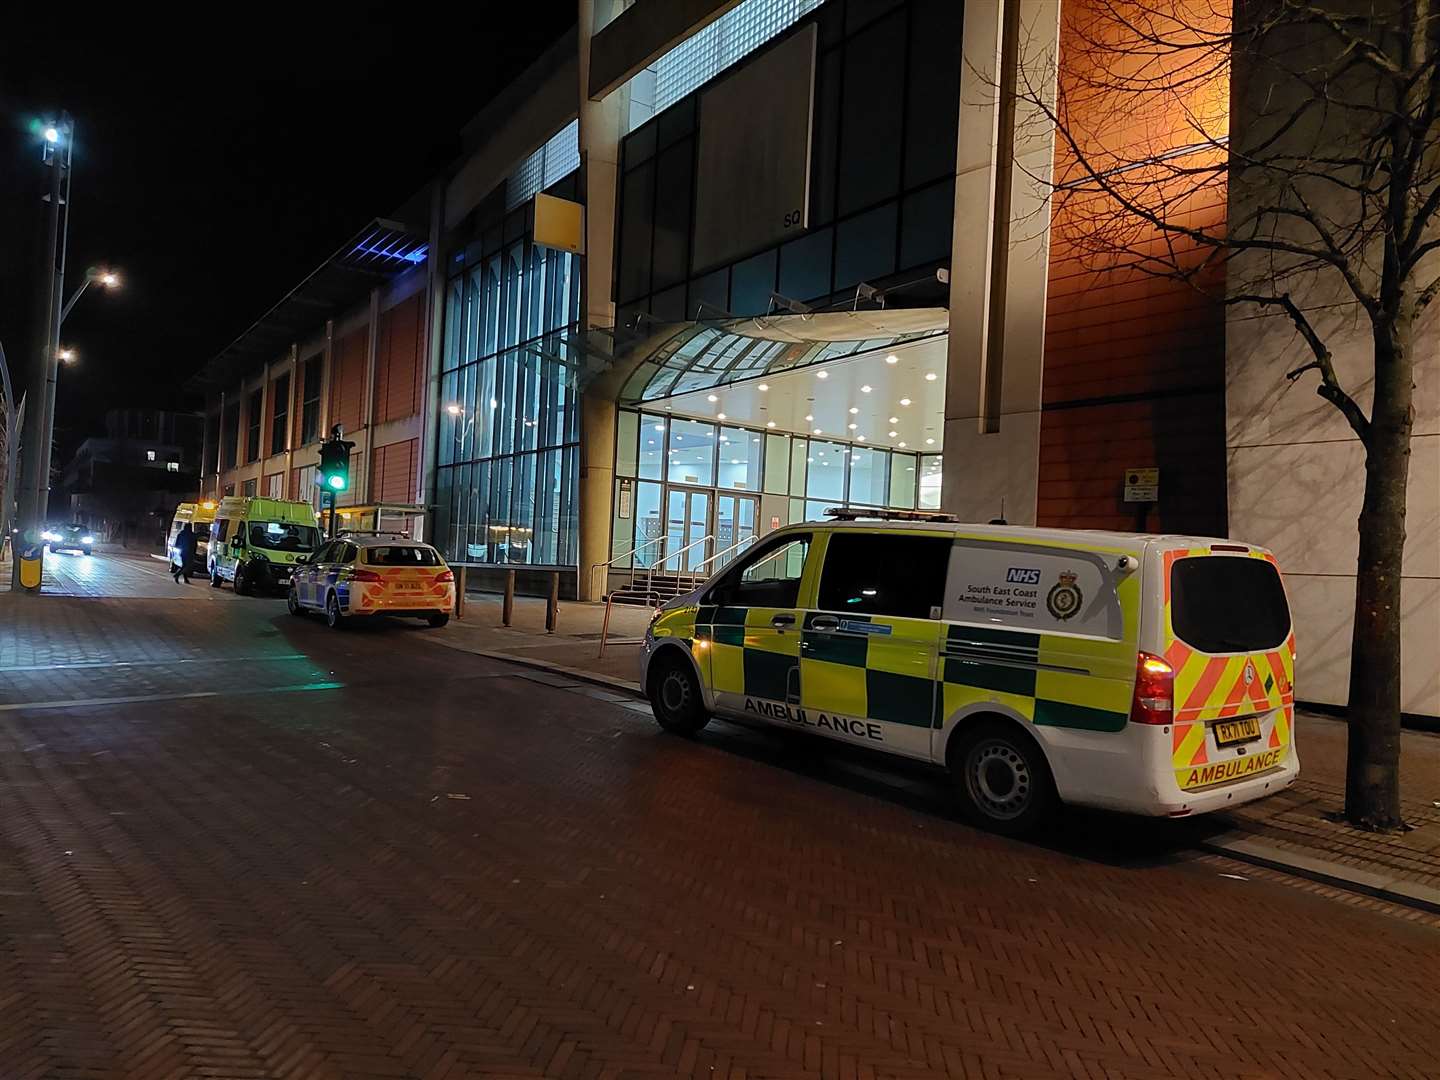 Police and ambulances at County Square in Ashford